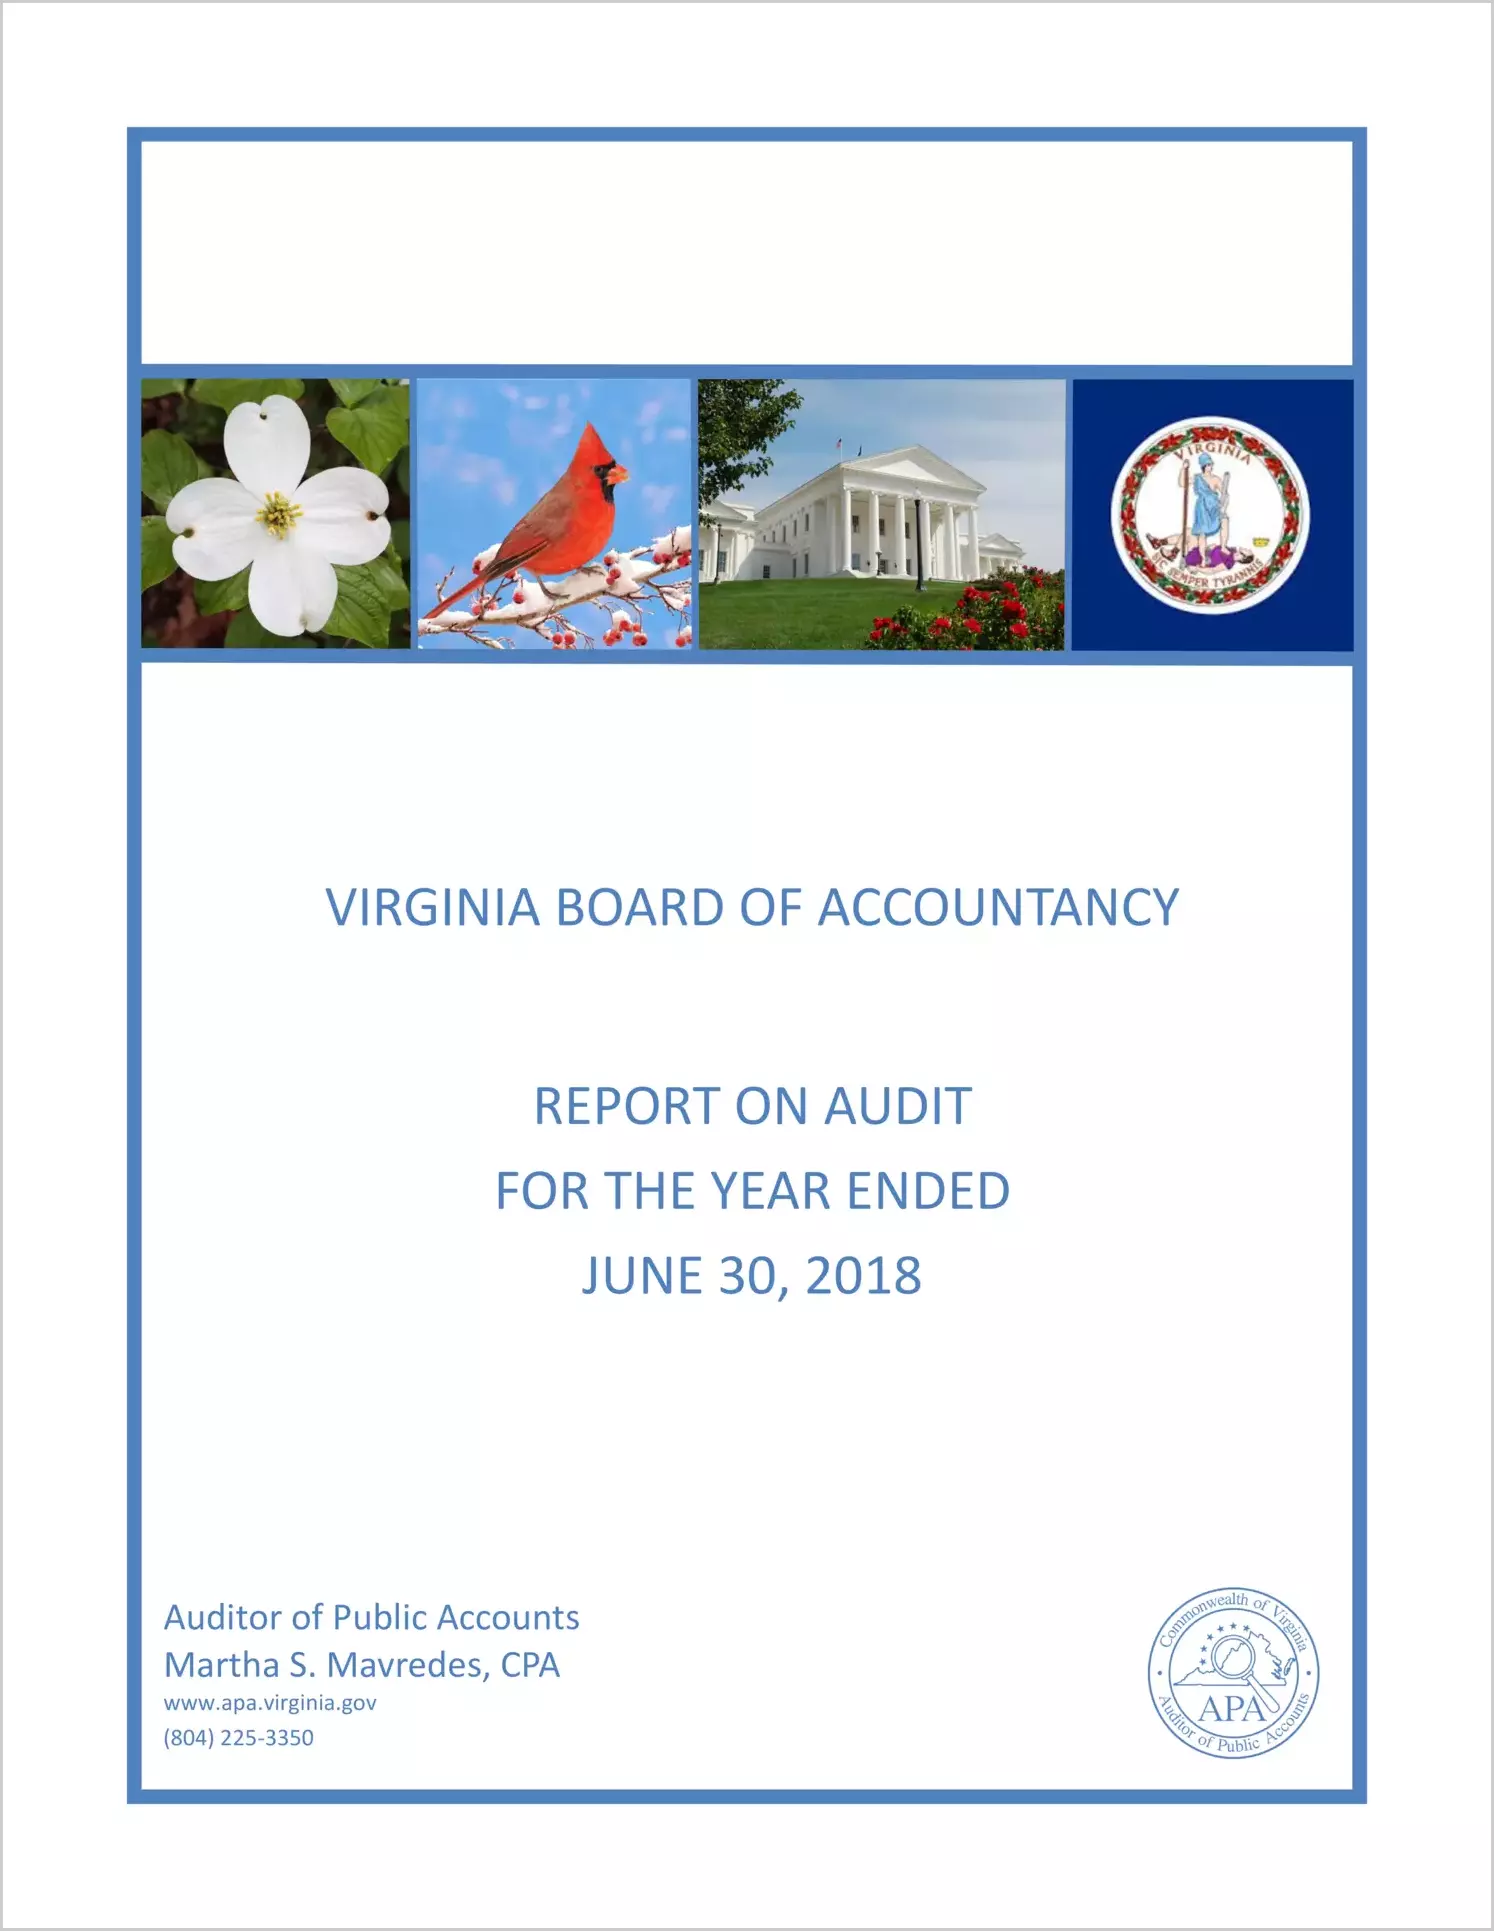 Virginia Board of Accountancy for the year ended June 30, 2018